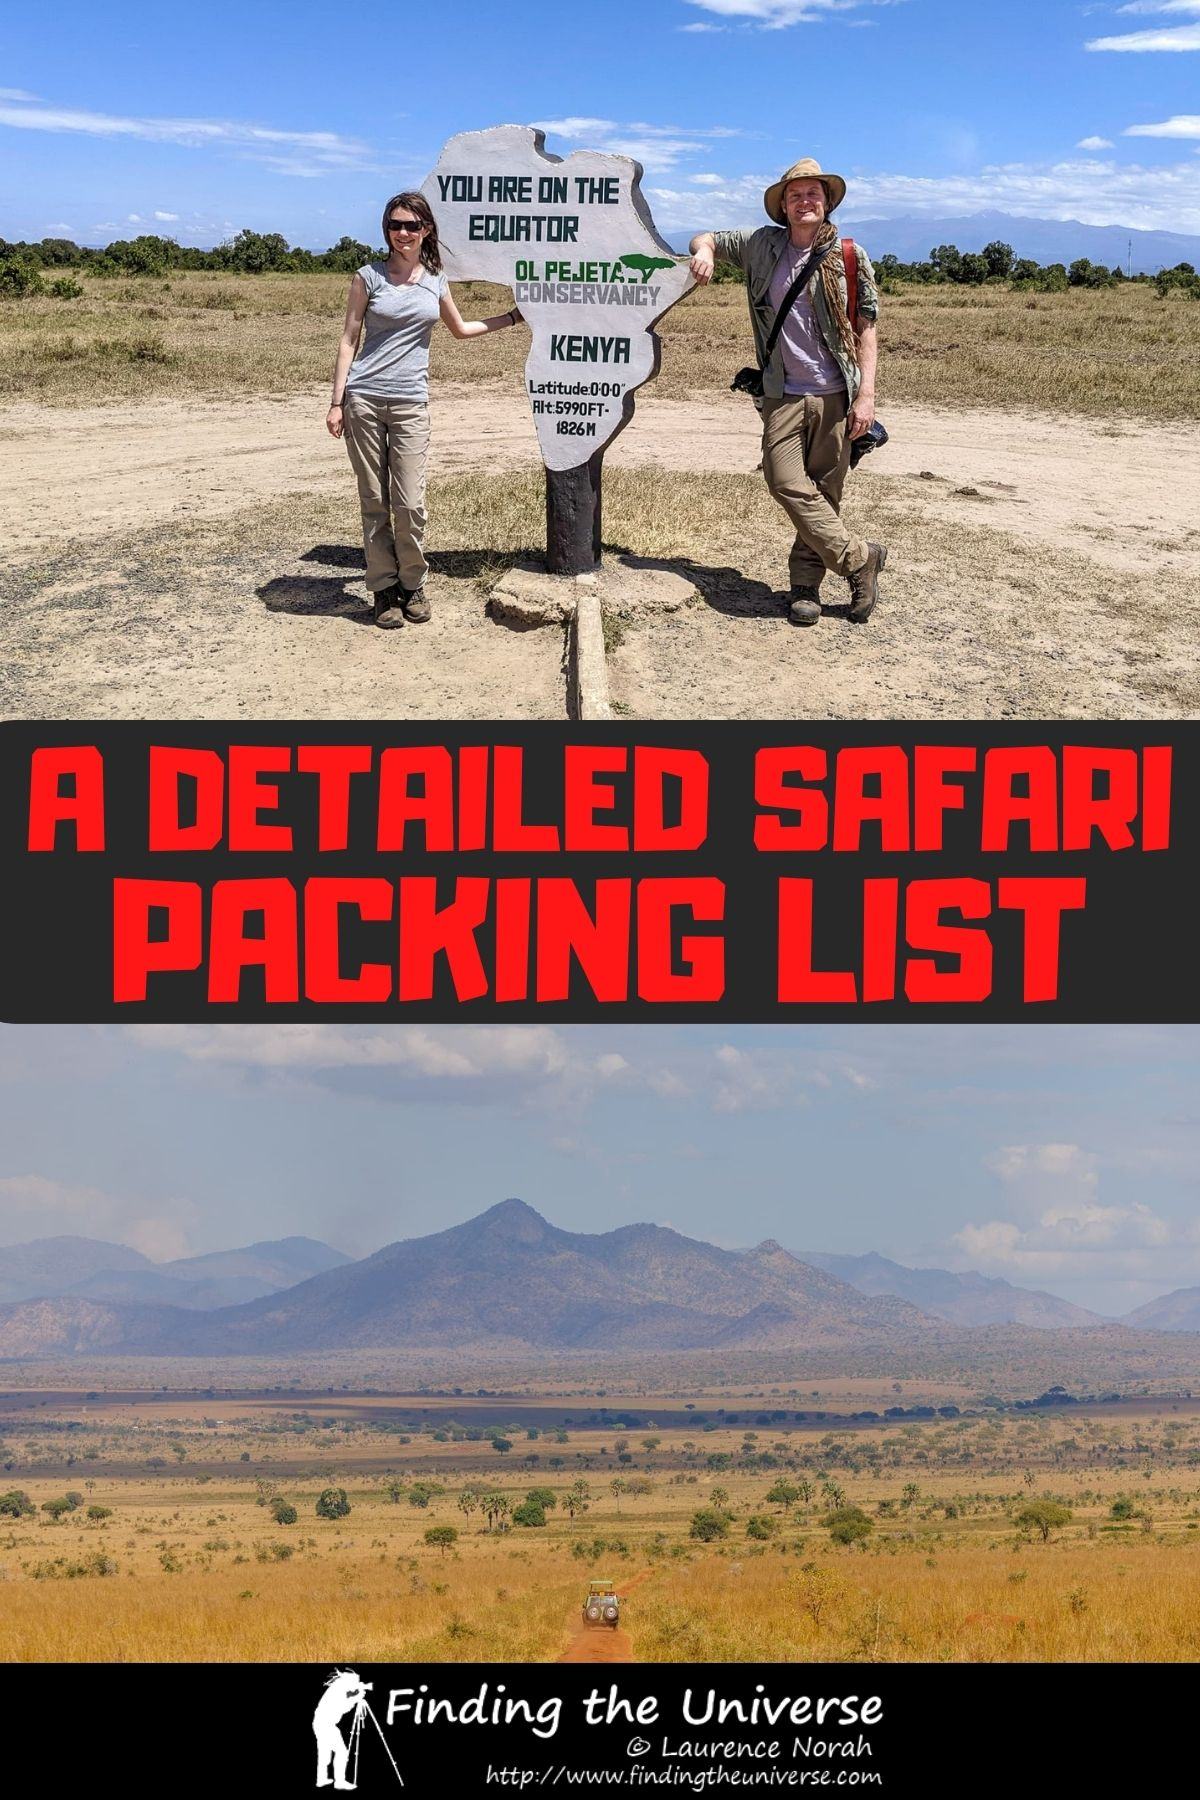 A comprehensive guide to what to pack on safari. Includes tips on what to consider and loads of packing suggestions